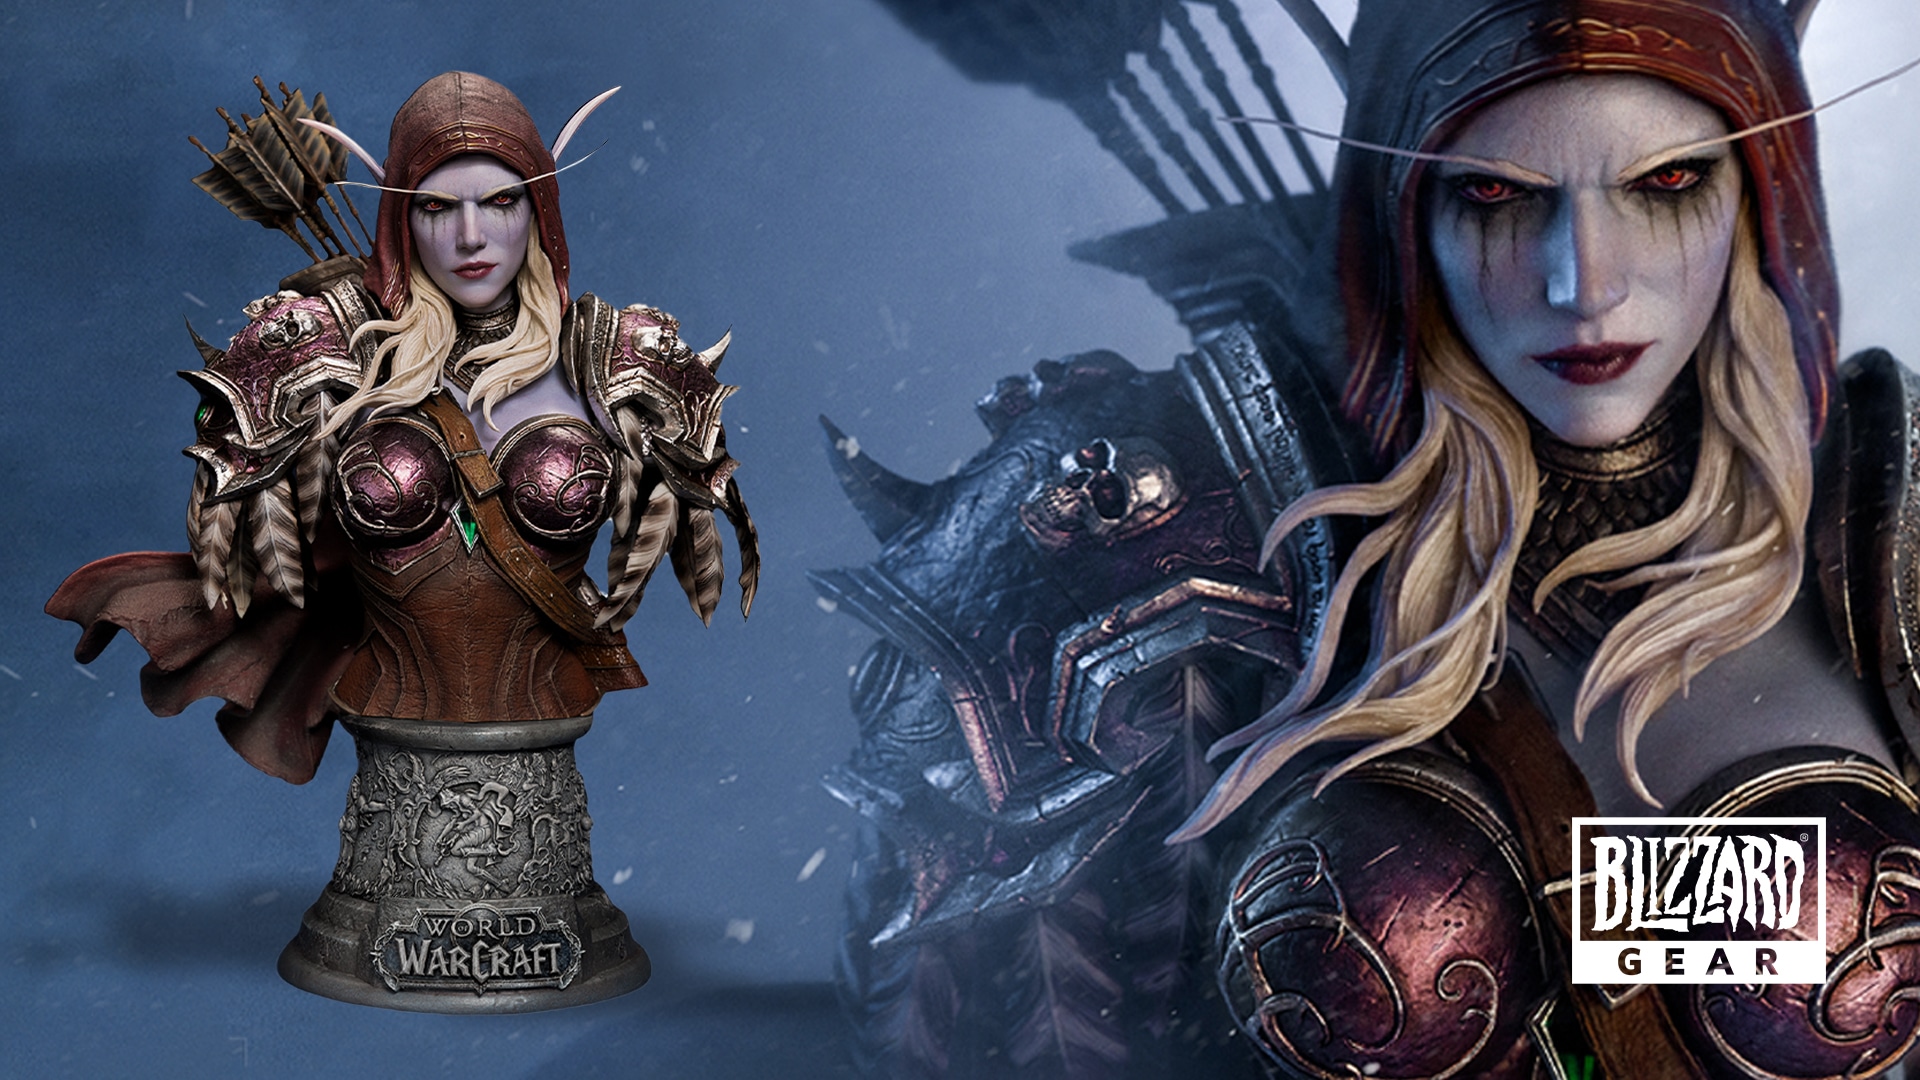 Pre-order the 15-inch Sylvanas Windrunner bust statue